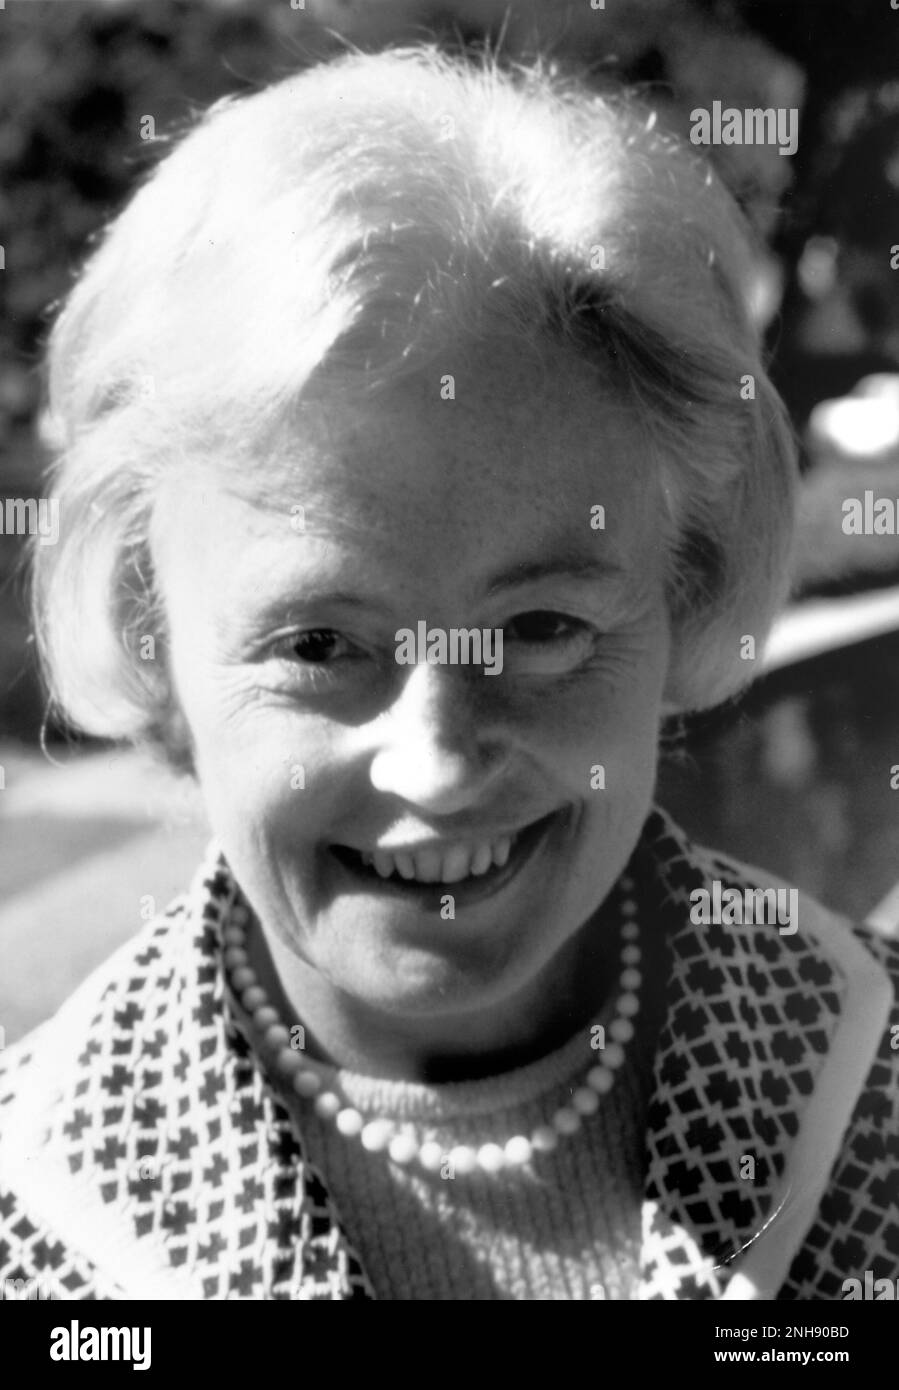 Margaret Burbidge, the first female president of the American Astronomical Society (AAS) at the International Astronomical Union (IAU) meeting in Canberra, Australia, August 1973. Eleanor Margaret Burbidge (1919-2020) was a British-American observational astronomer and astrophysicist. She was one of the founders of stellar nucleosynthesis, worked on galaxy rotation curves and quasars, and helped develop the Faint Object Spectrograph on the Hubble Space Telescope. Stock Photo